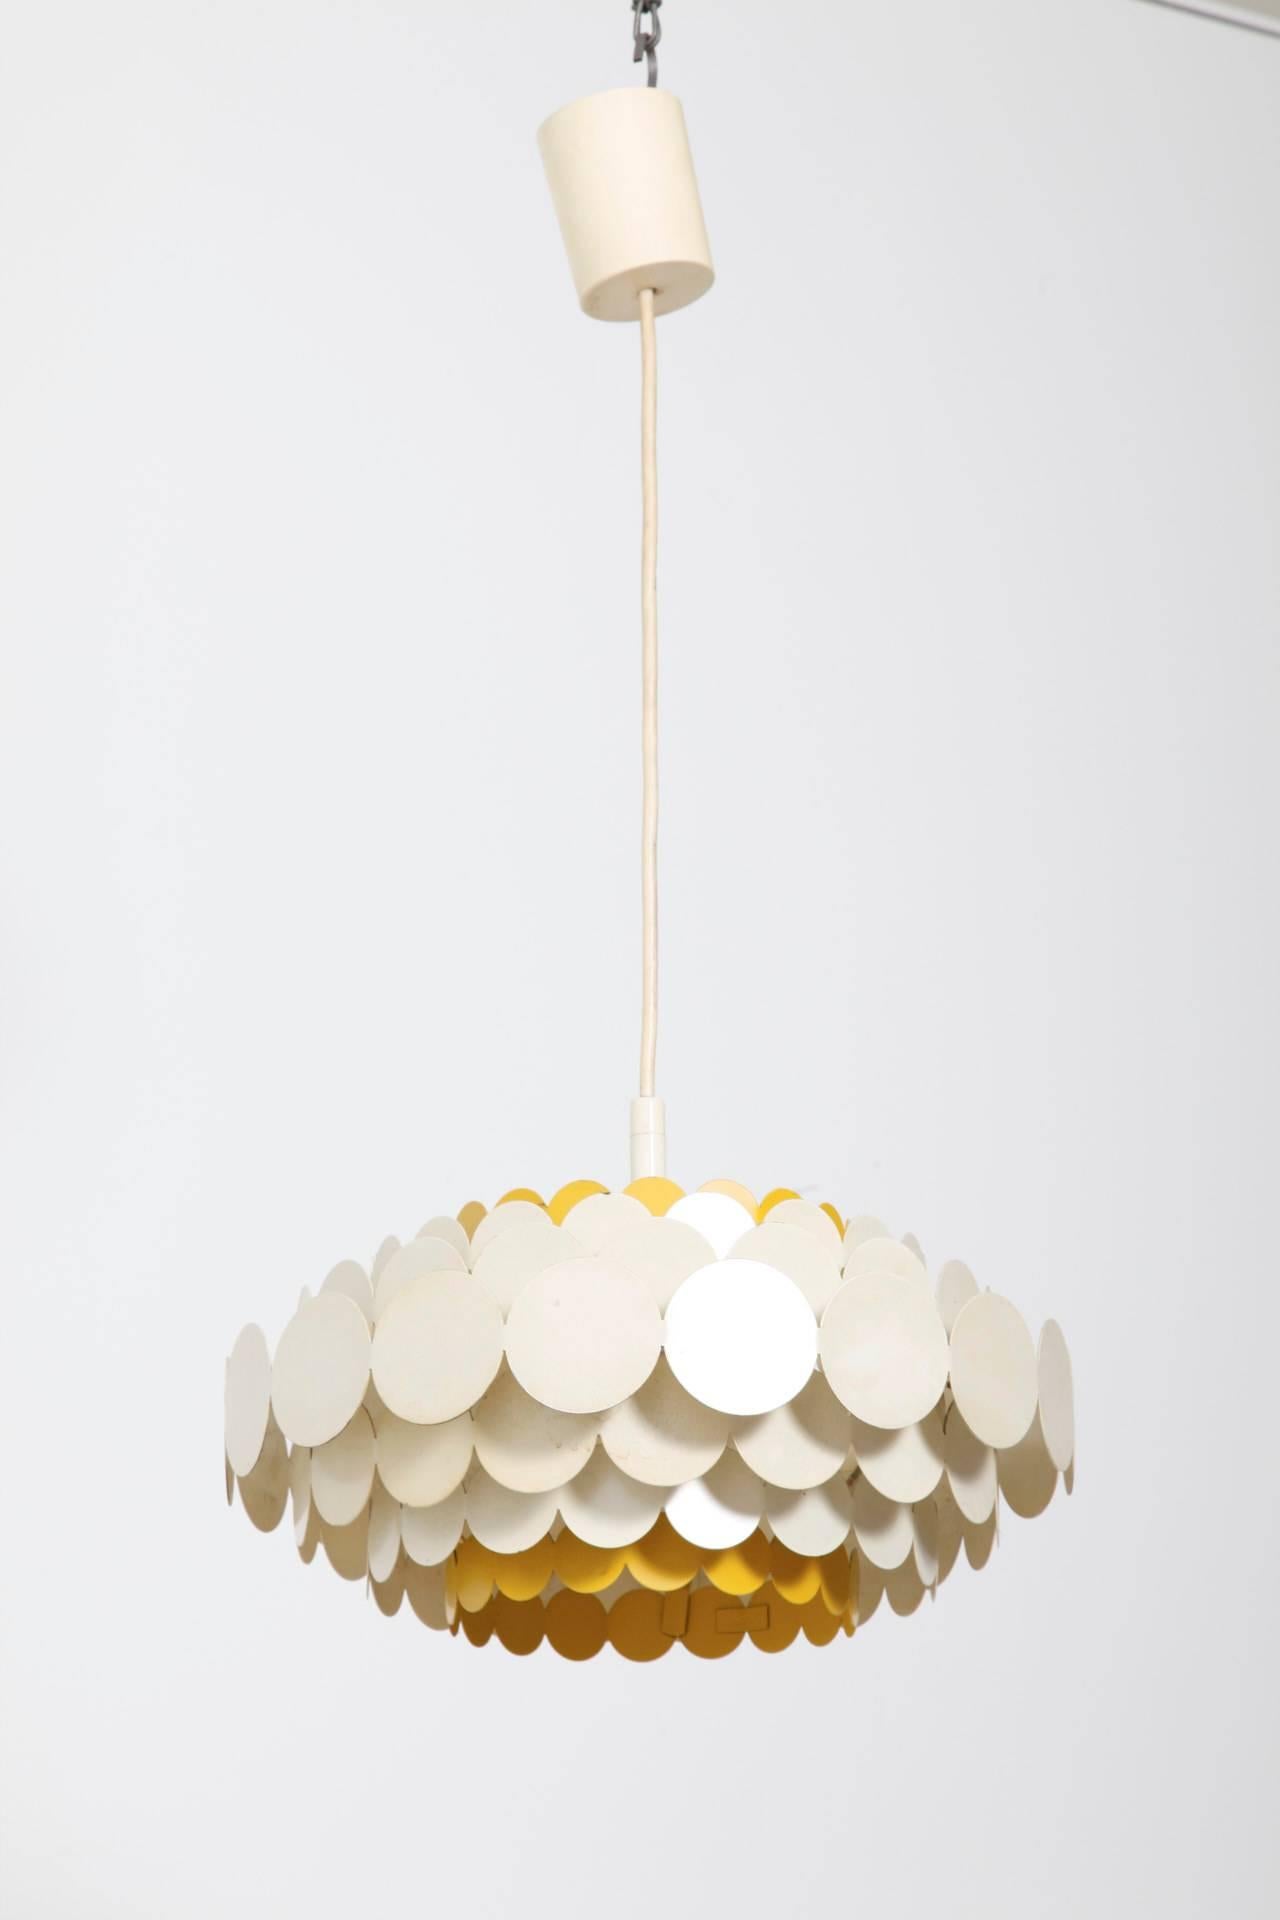 Very nice 1950s pendant for a soft atmospheric lighting in the living room or kids room.